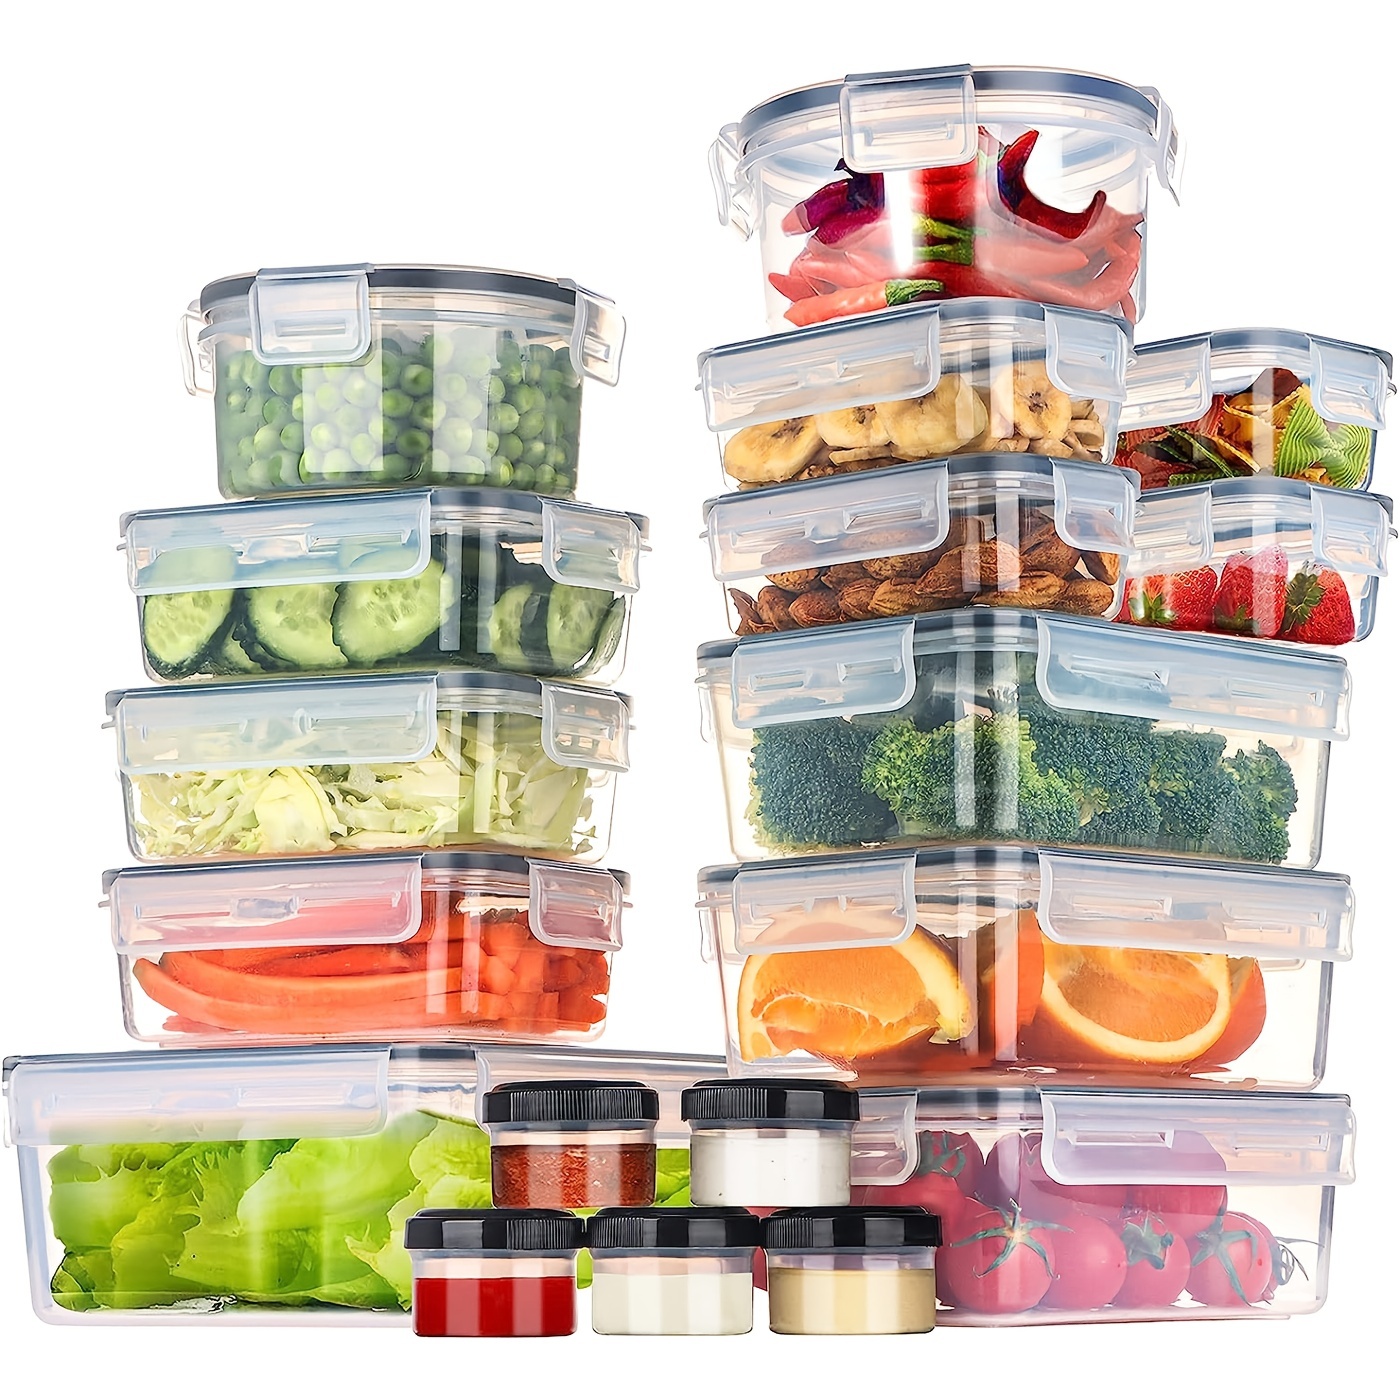 Large Fruit Vegetable Storage Container with Folding Lids,3 Pack Produce Saver with Vents Stackable Fridge Drawers Organizer Salad Lettuce Keeper